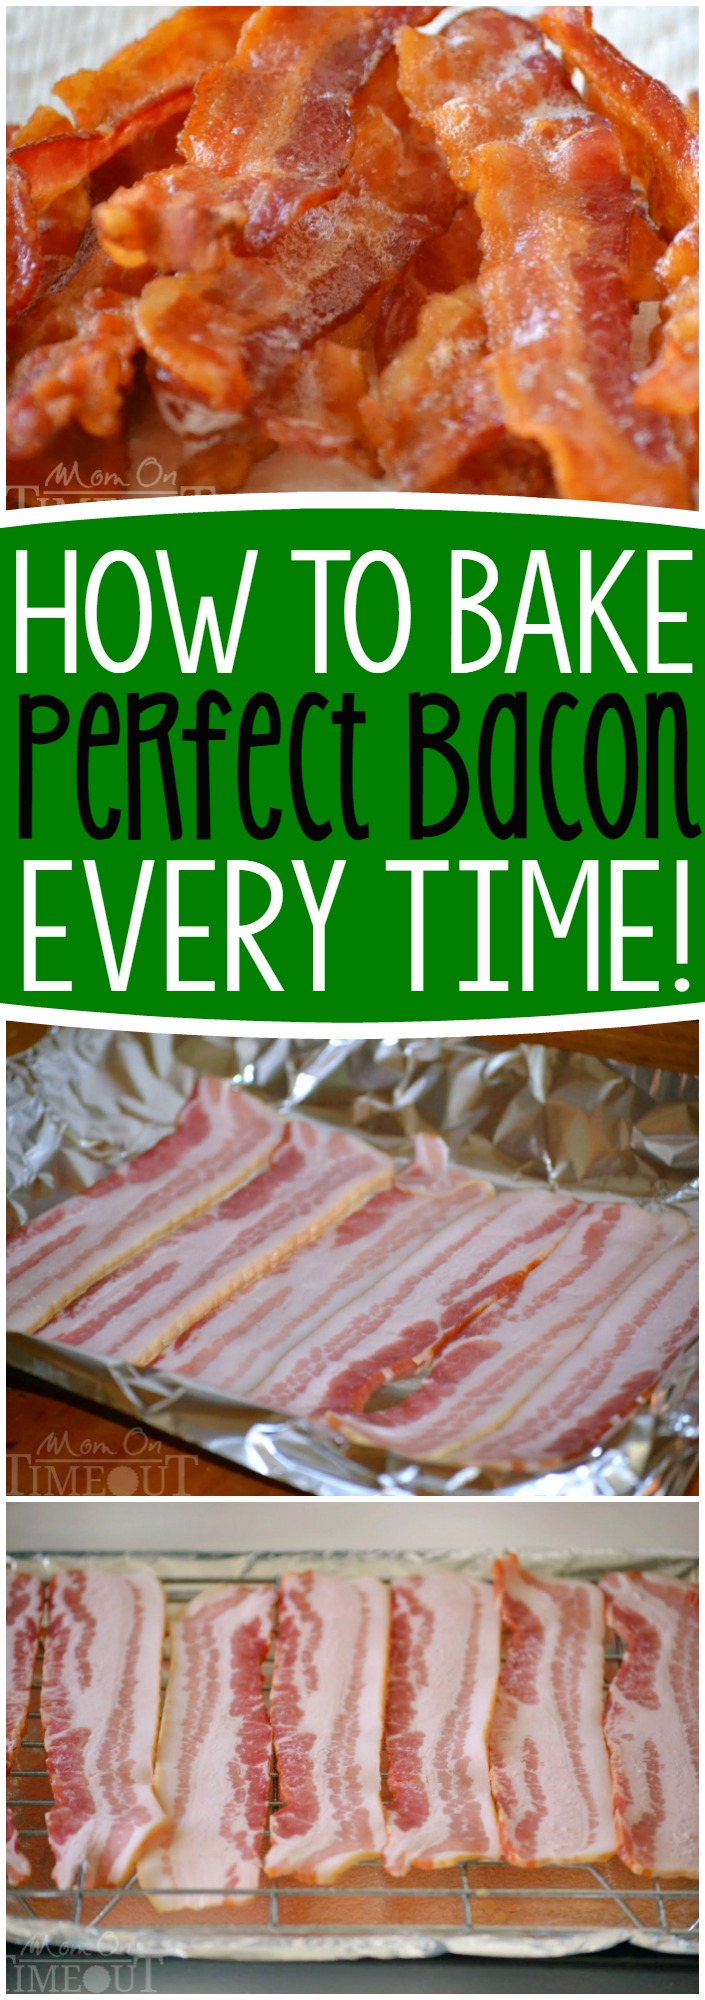 https://www.momontimeout.com/wp-content/uploads/2011/07/how-to-bake-bacon-perfect-every-time-collage.jpg